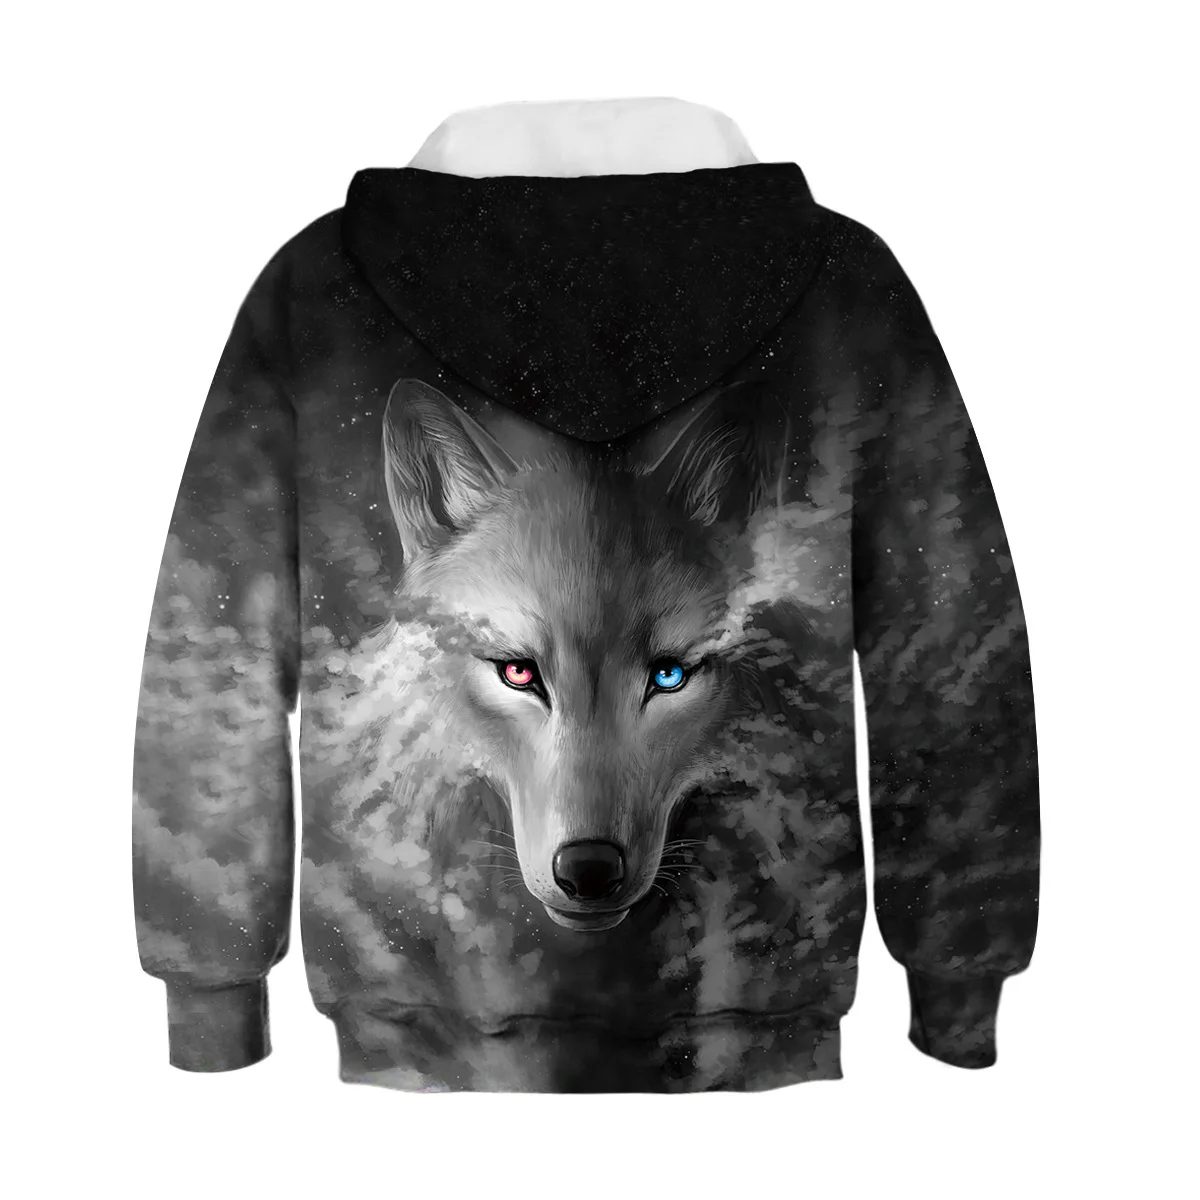 3D WOLF Boys Sweatshirt Hoodies Teens Spring Autumn Hooded Coat For Boys Kids Clothes Children Long Sleeve Pullover Tops